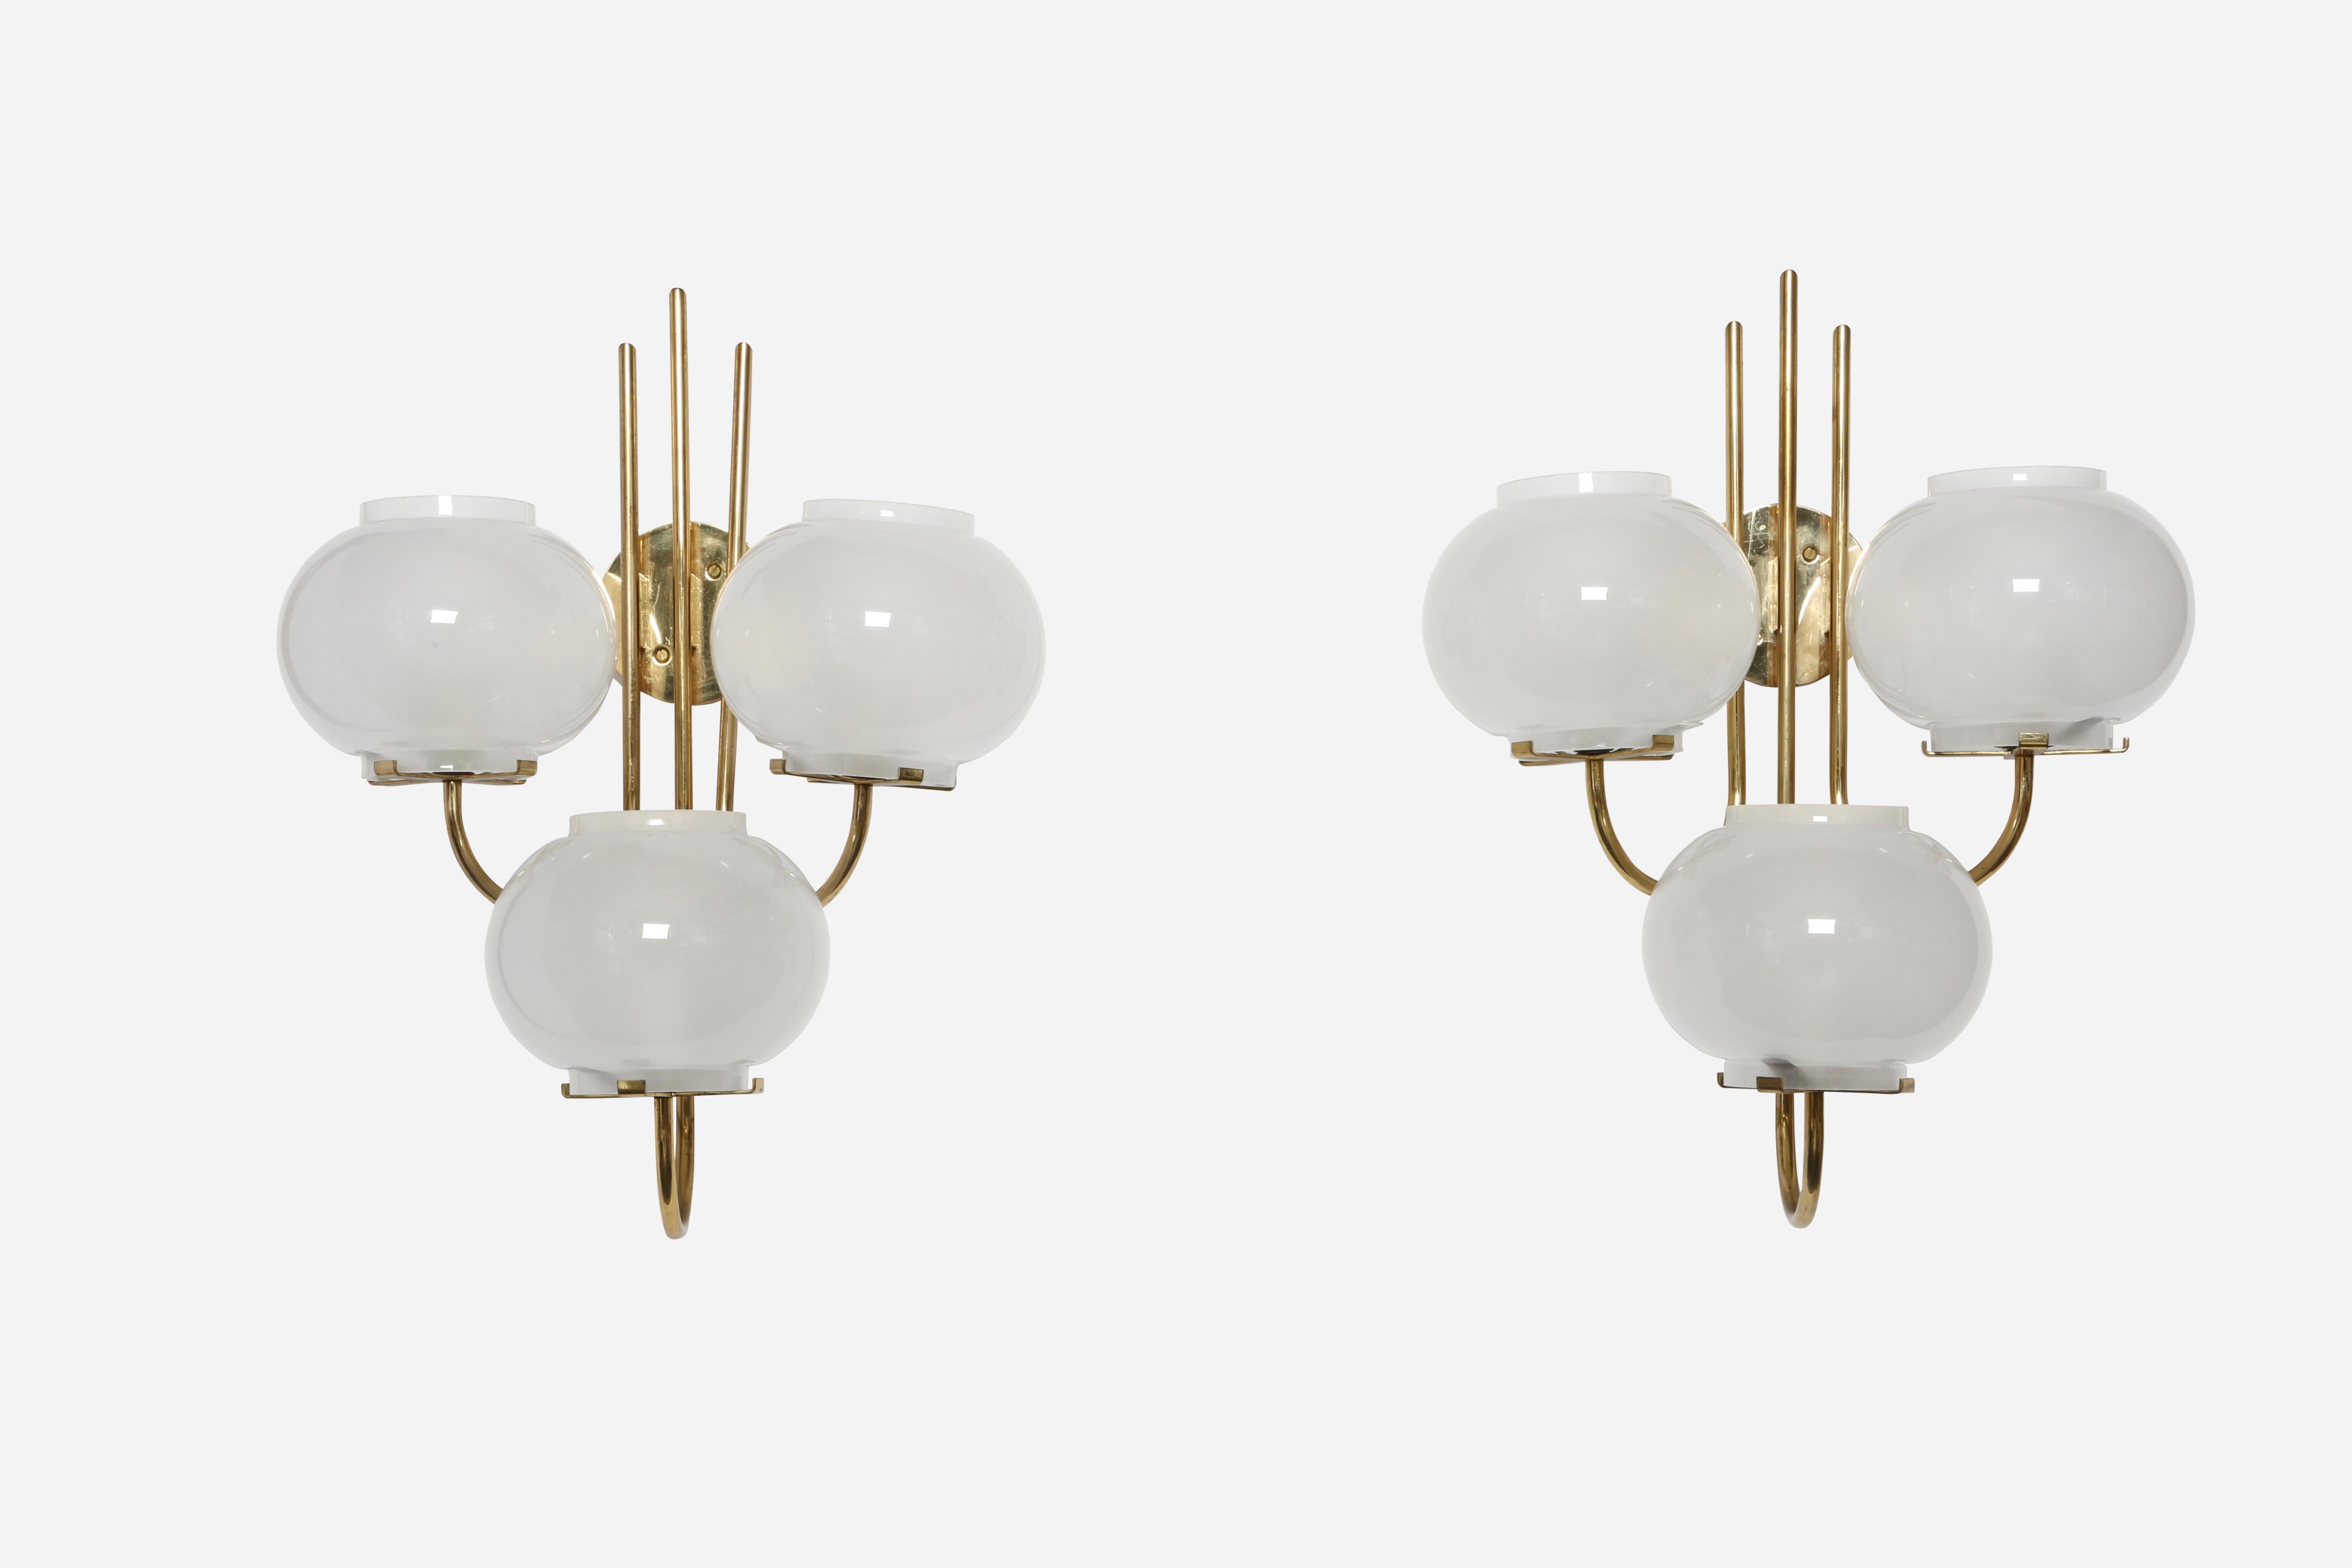 Pair of sconces by Tito Agnoli for Oluce.
Designed and made in Italy in 1960s
Brass and frosted glass.
Three candelabra base sockets each.
Complimentary US rewiring upon request.

We take pride in bringing vintage fixtures to their full glory